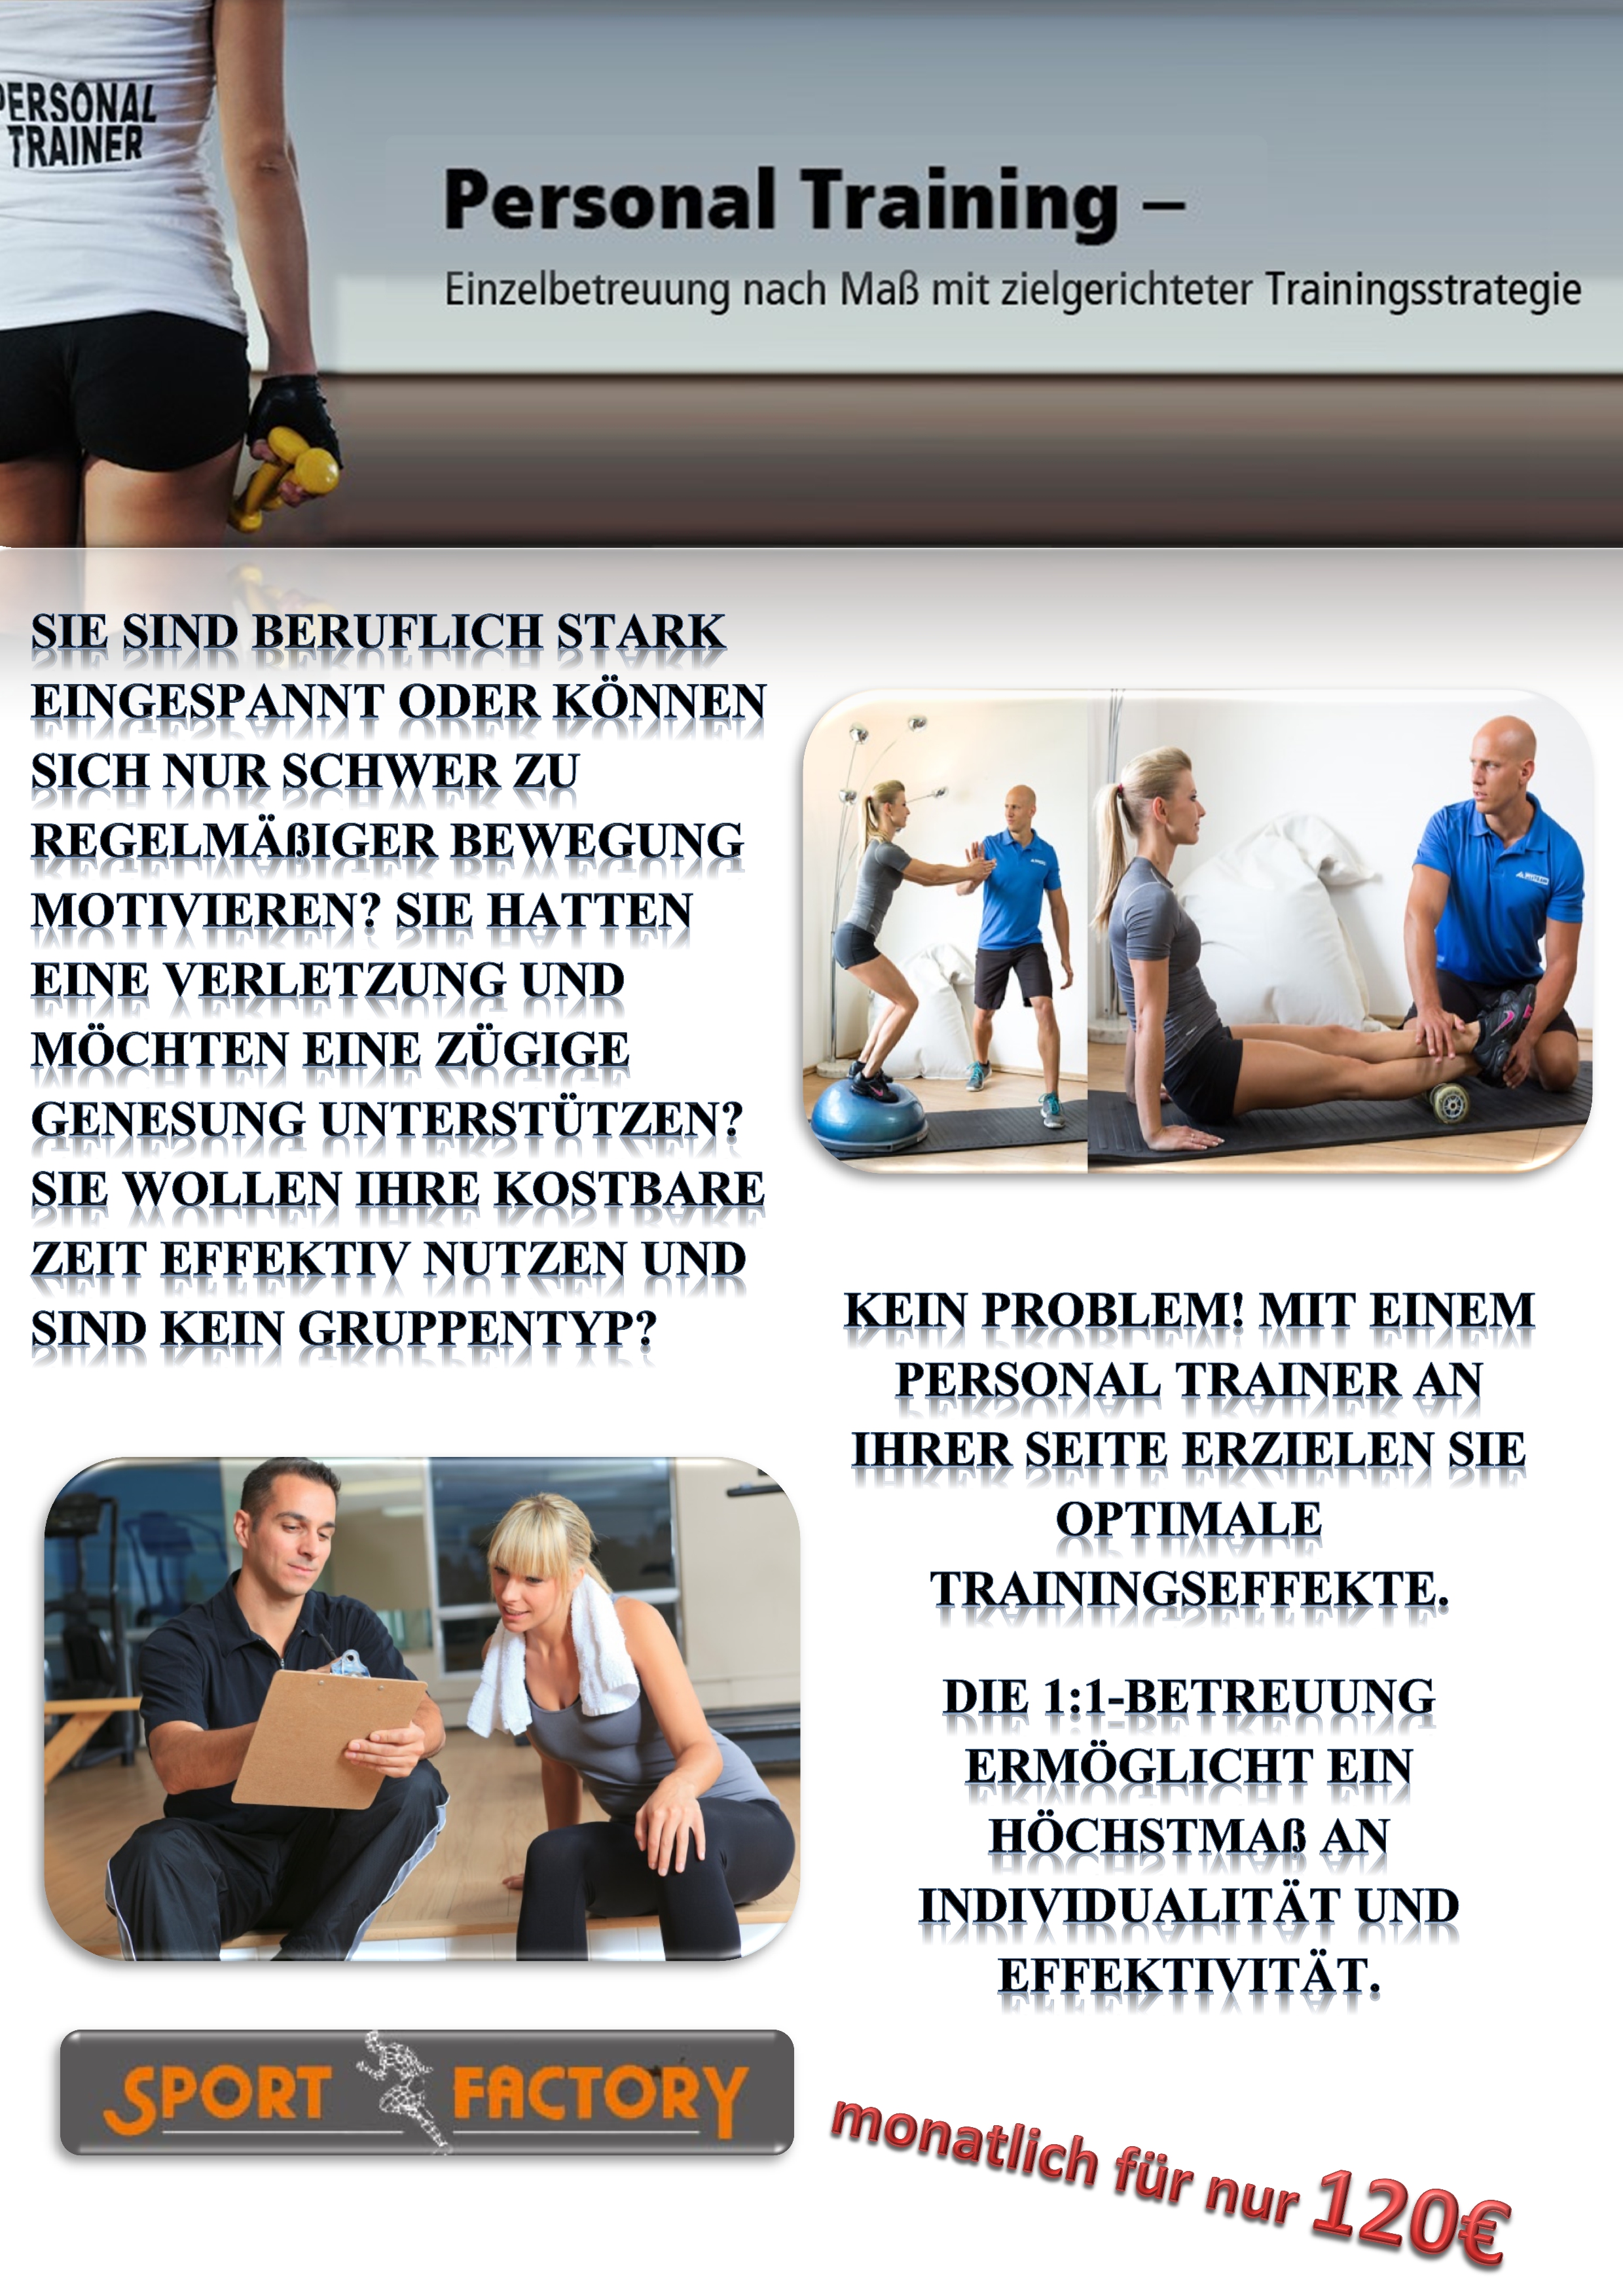 Personal Training in deiner Sport Factory Magdeburg